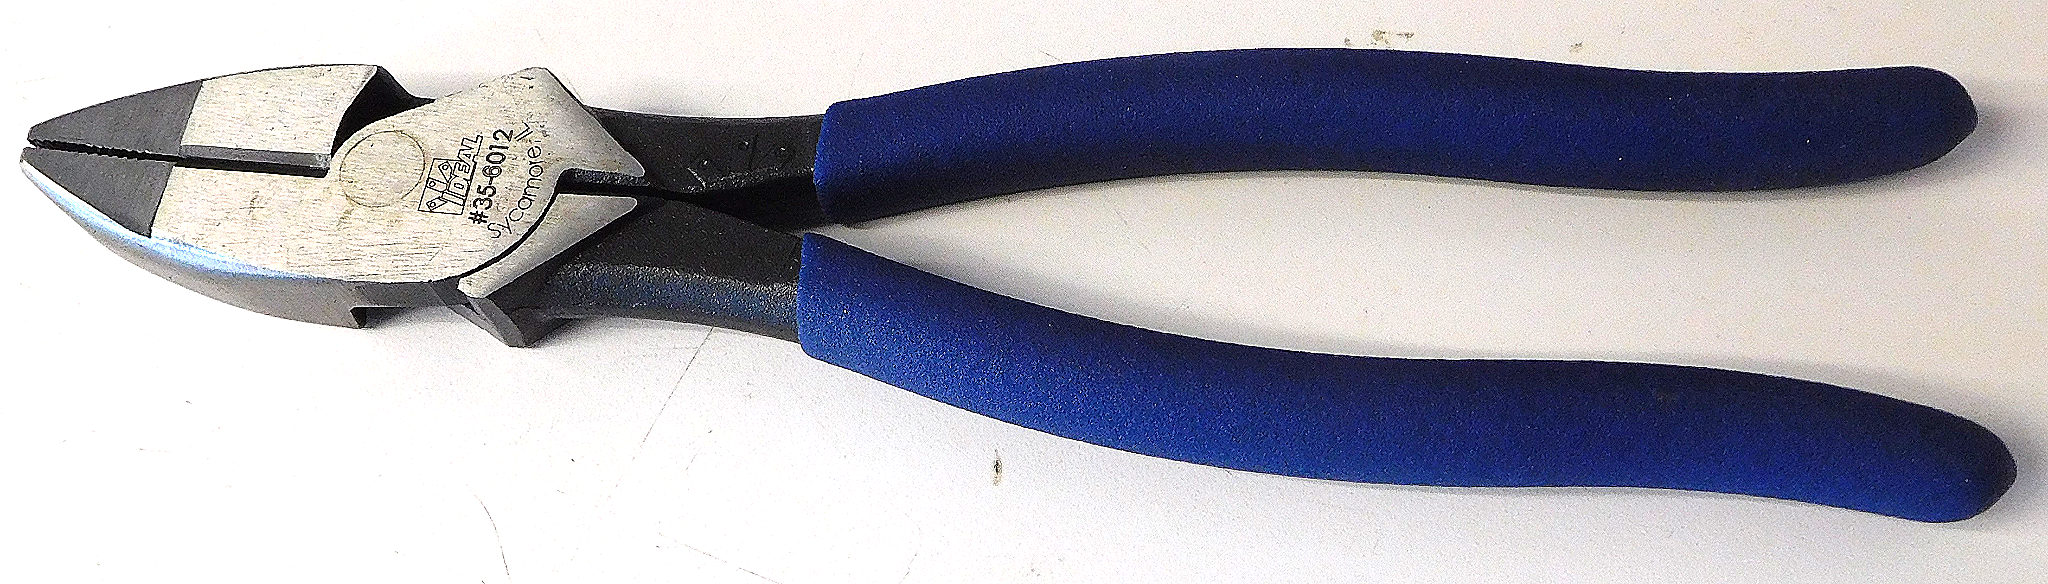 Ideal 35-6012 WireMan 9-1/4" Side Cutting Pliers